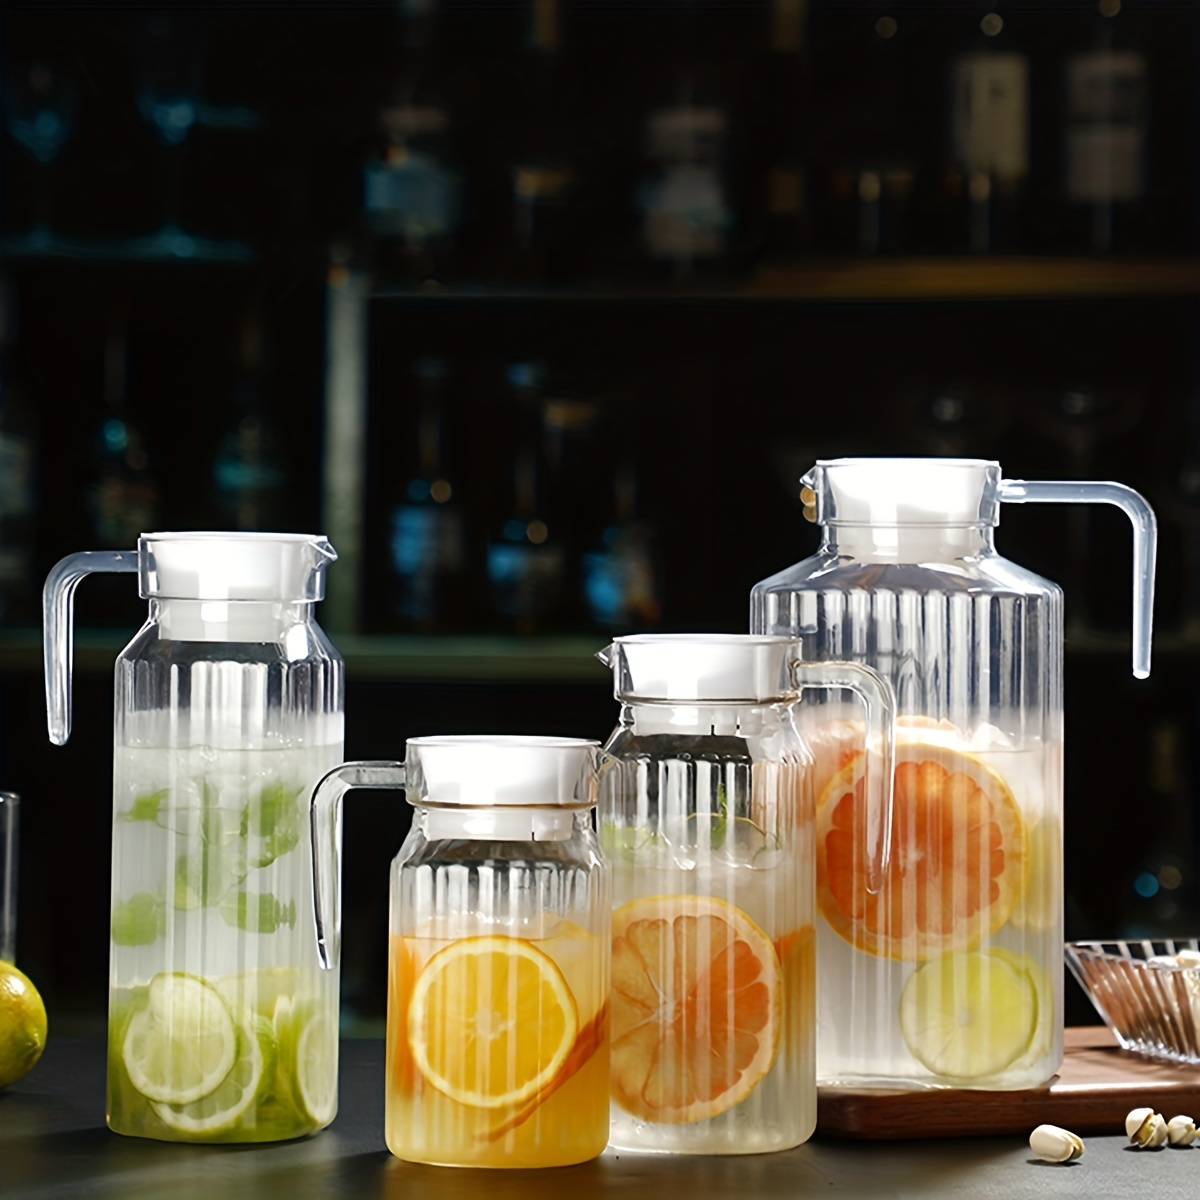 

1pc Pitcher With Lid - Beverage Serveware And Storage Container For Hot Liquids Or Cold Drinks. Fridge Pitcher, Juice Container, Water Jug, Iced Tea Pitcher Or Milk Pitcher